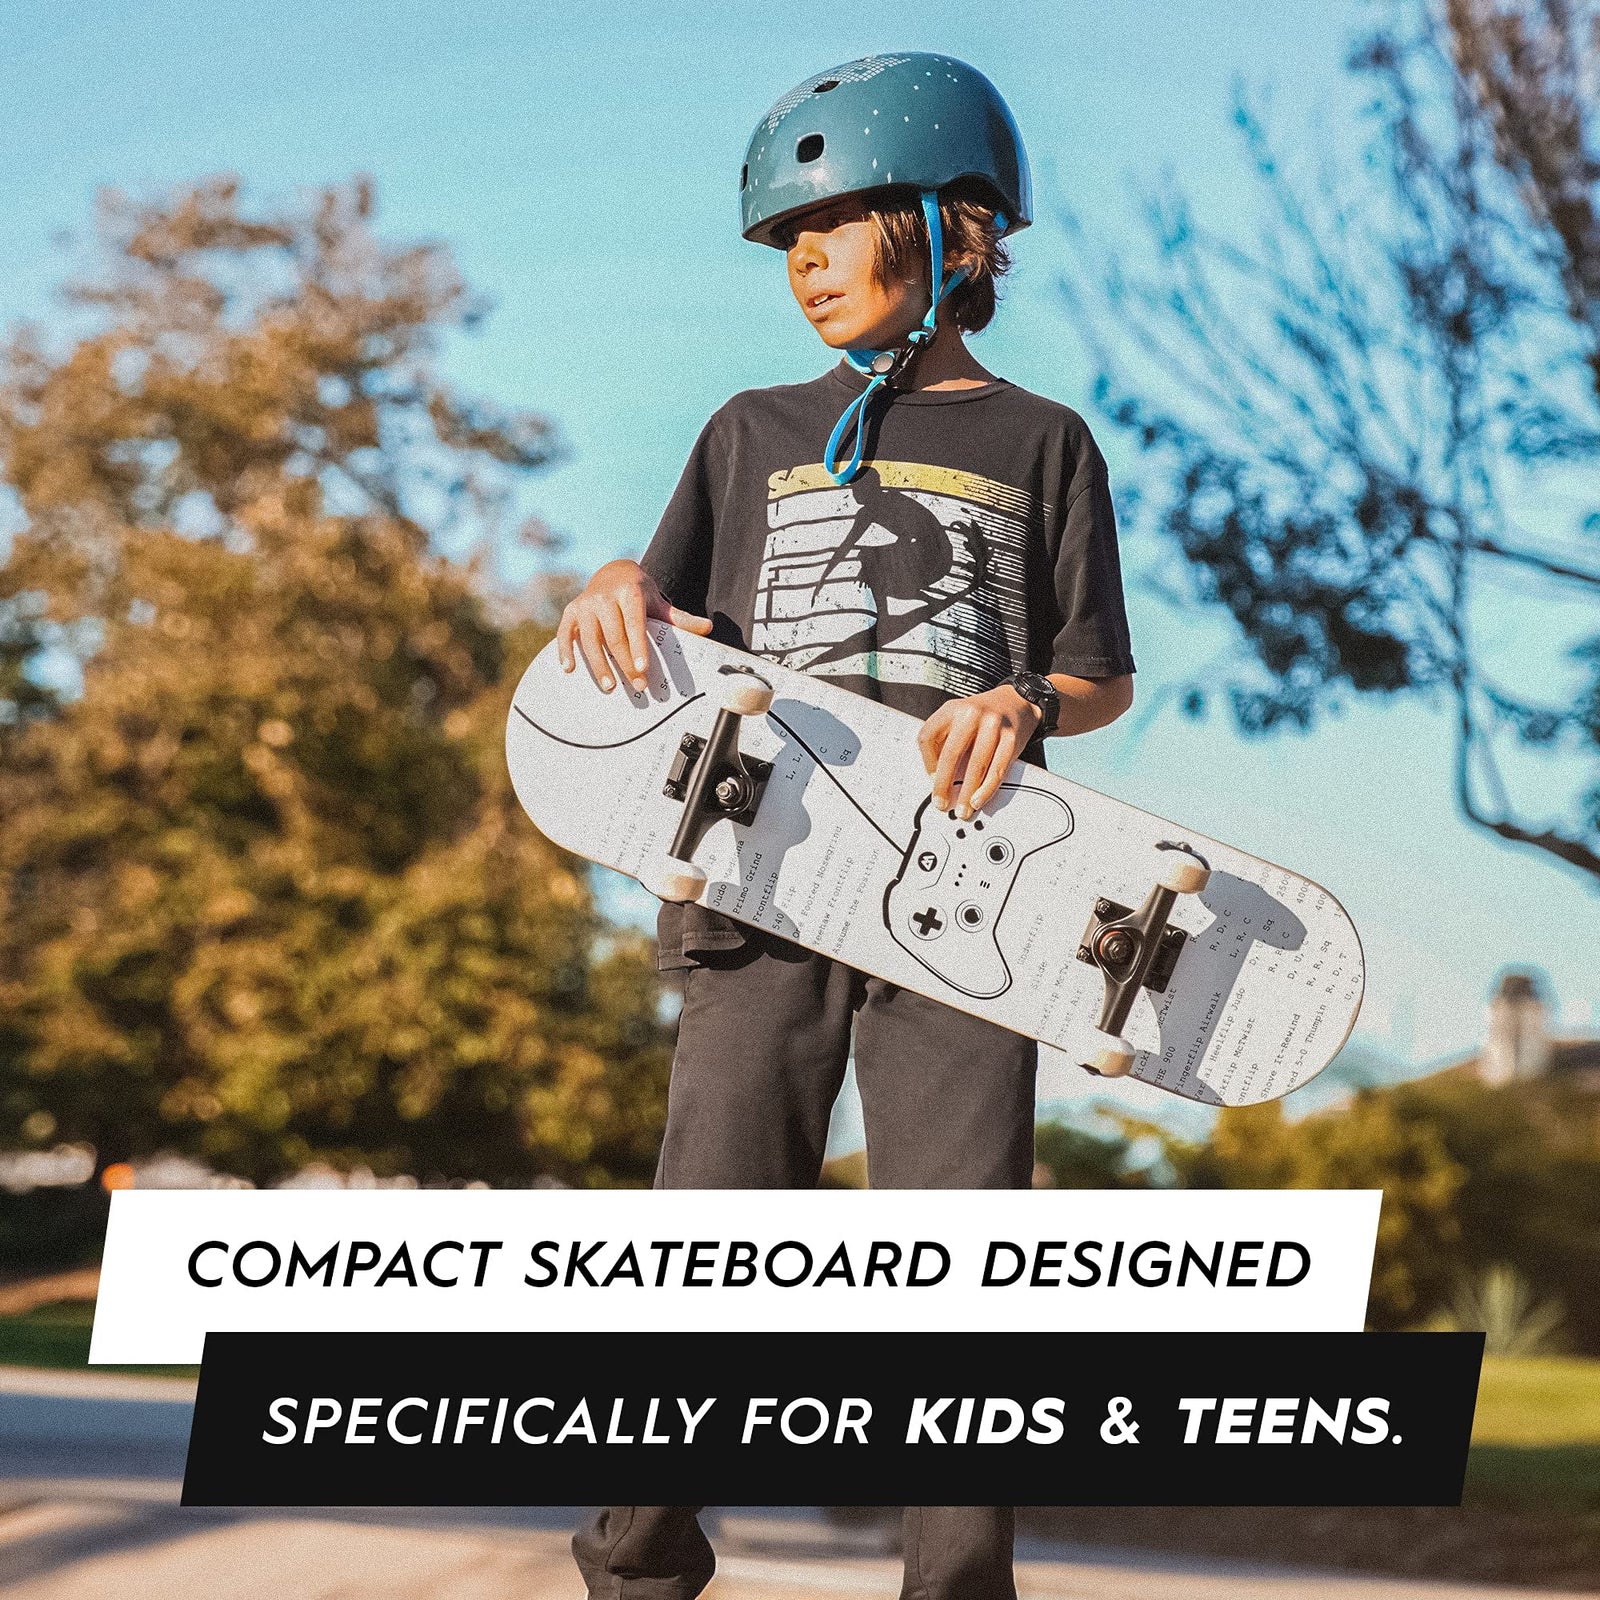 Magneto Kids Complete Skateboard | 27.7” x 7.75” | Maple Deck Components and Grip Tape | Full Assembled | Designed for Kids Teens Youth Boys Girls | Great First Board